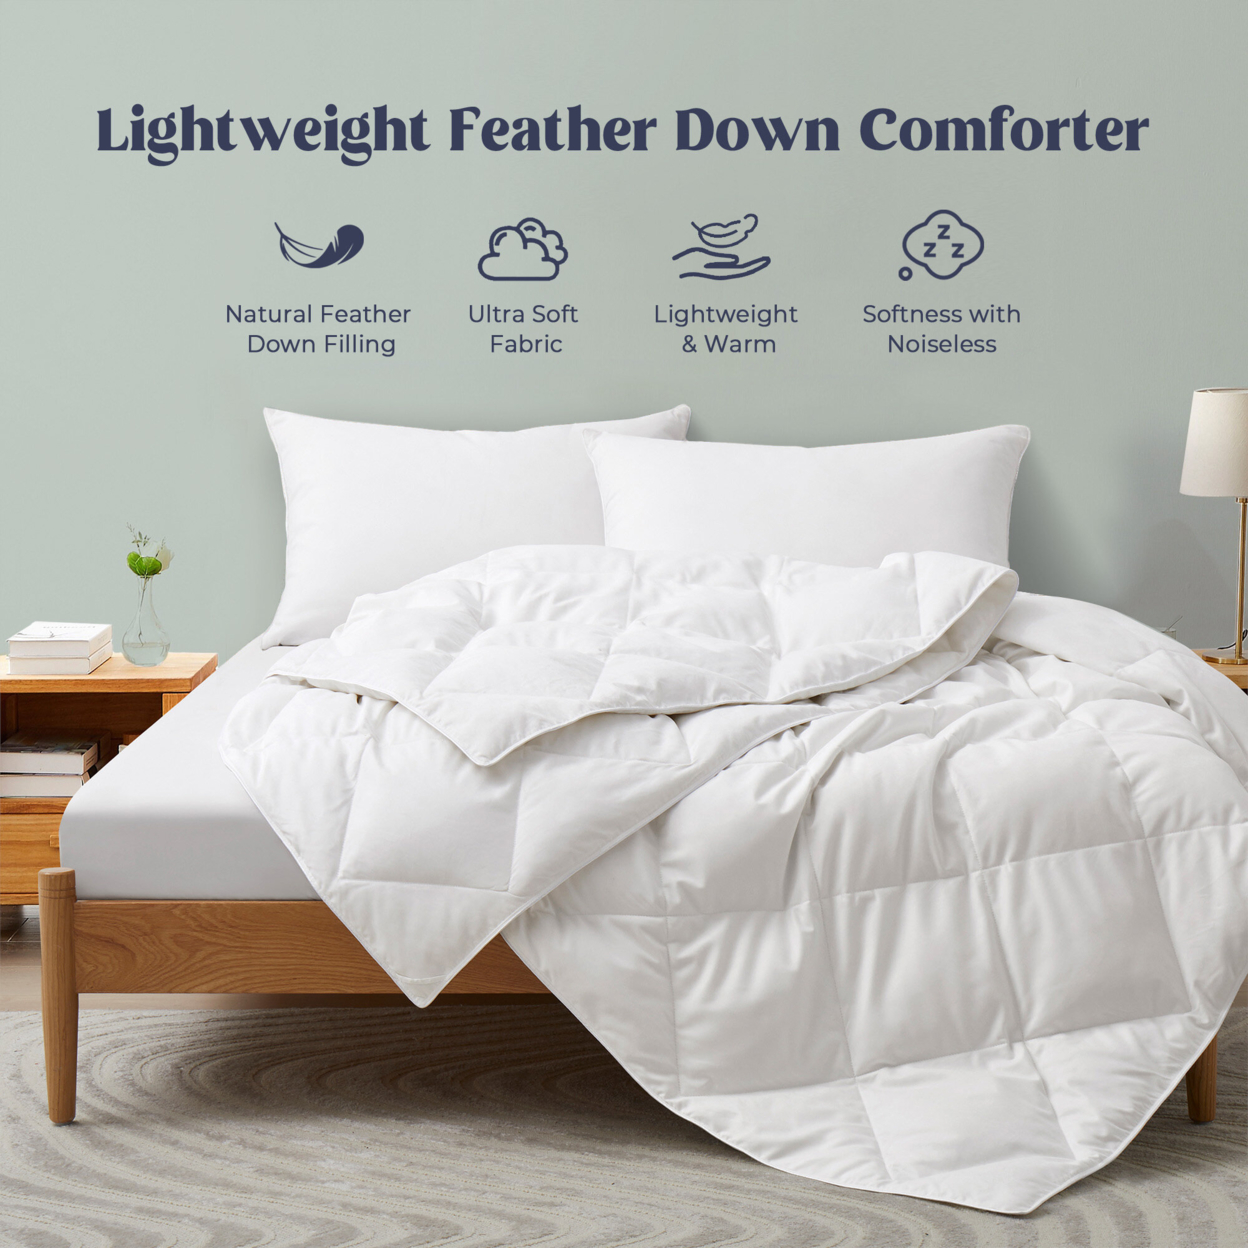 White Goose Feather Fiber And Down Comforter-Lightweight&Medium Weight, Sleep Soundly With Noiseless - Lightweight, Twin